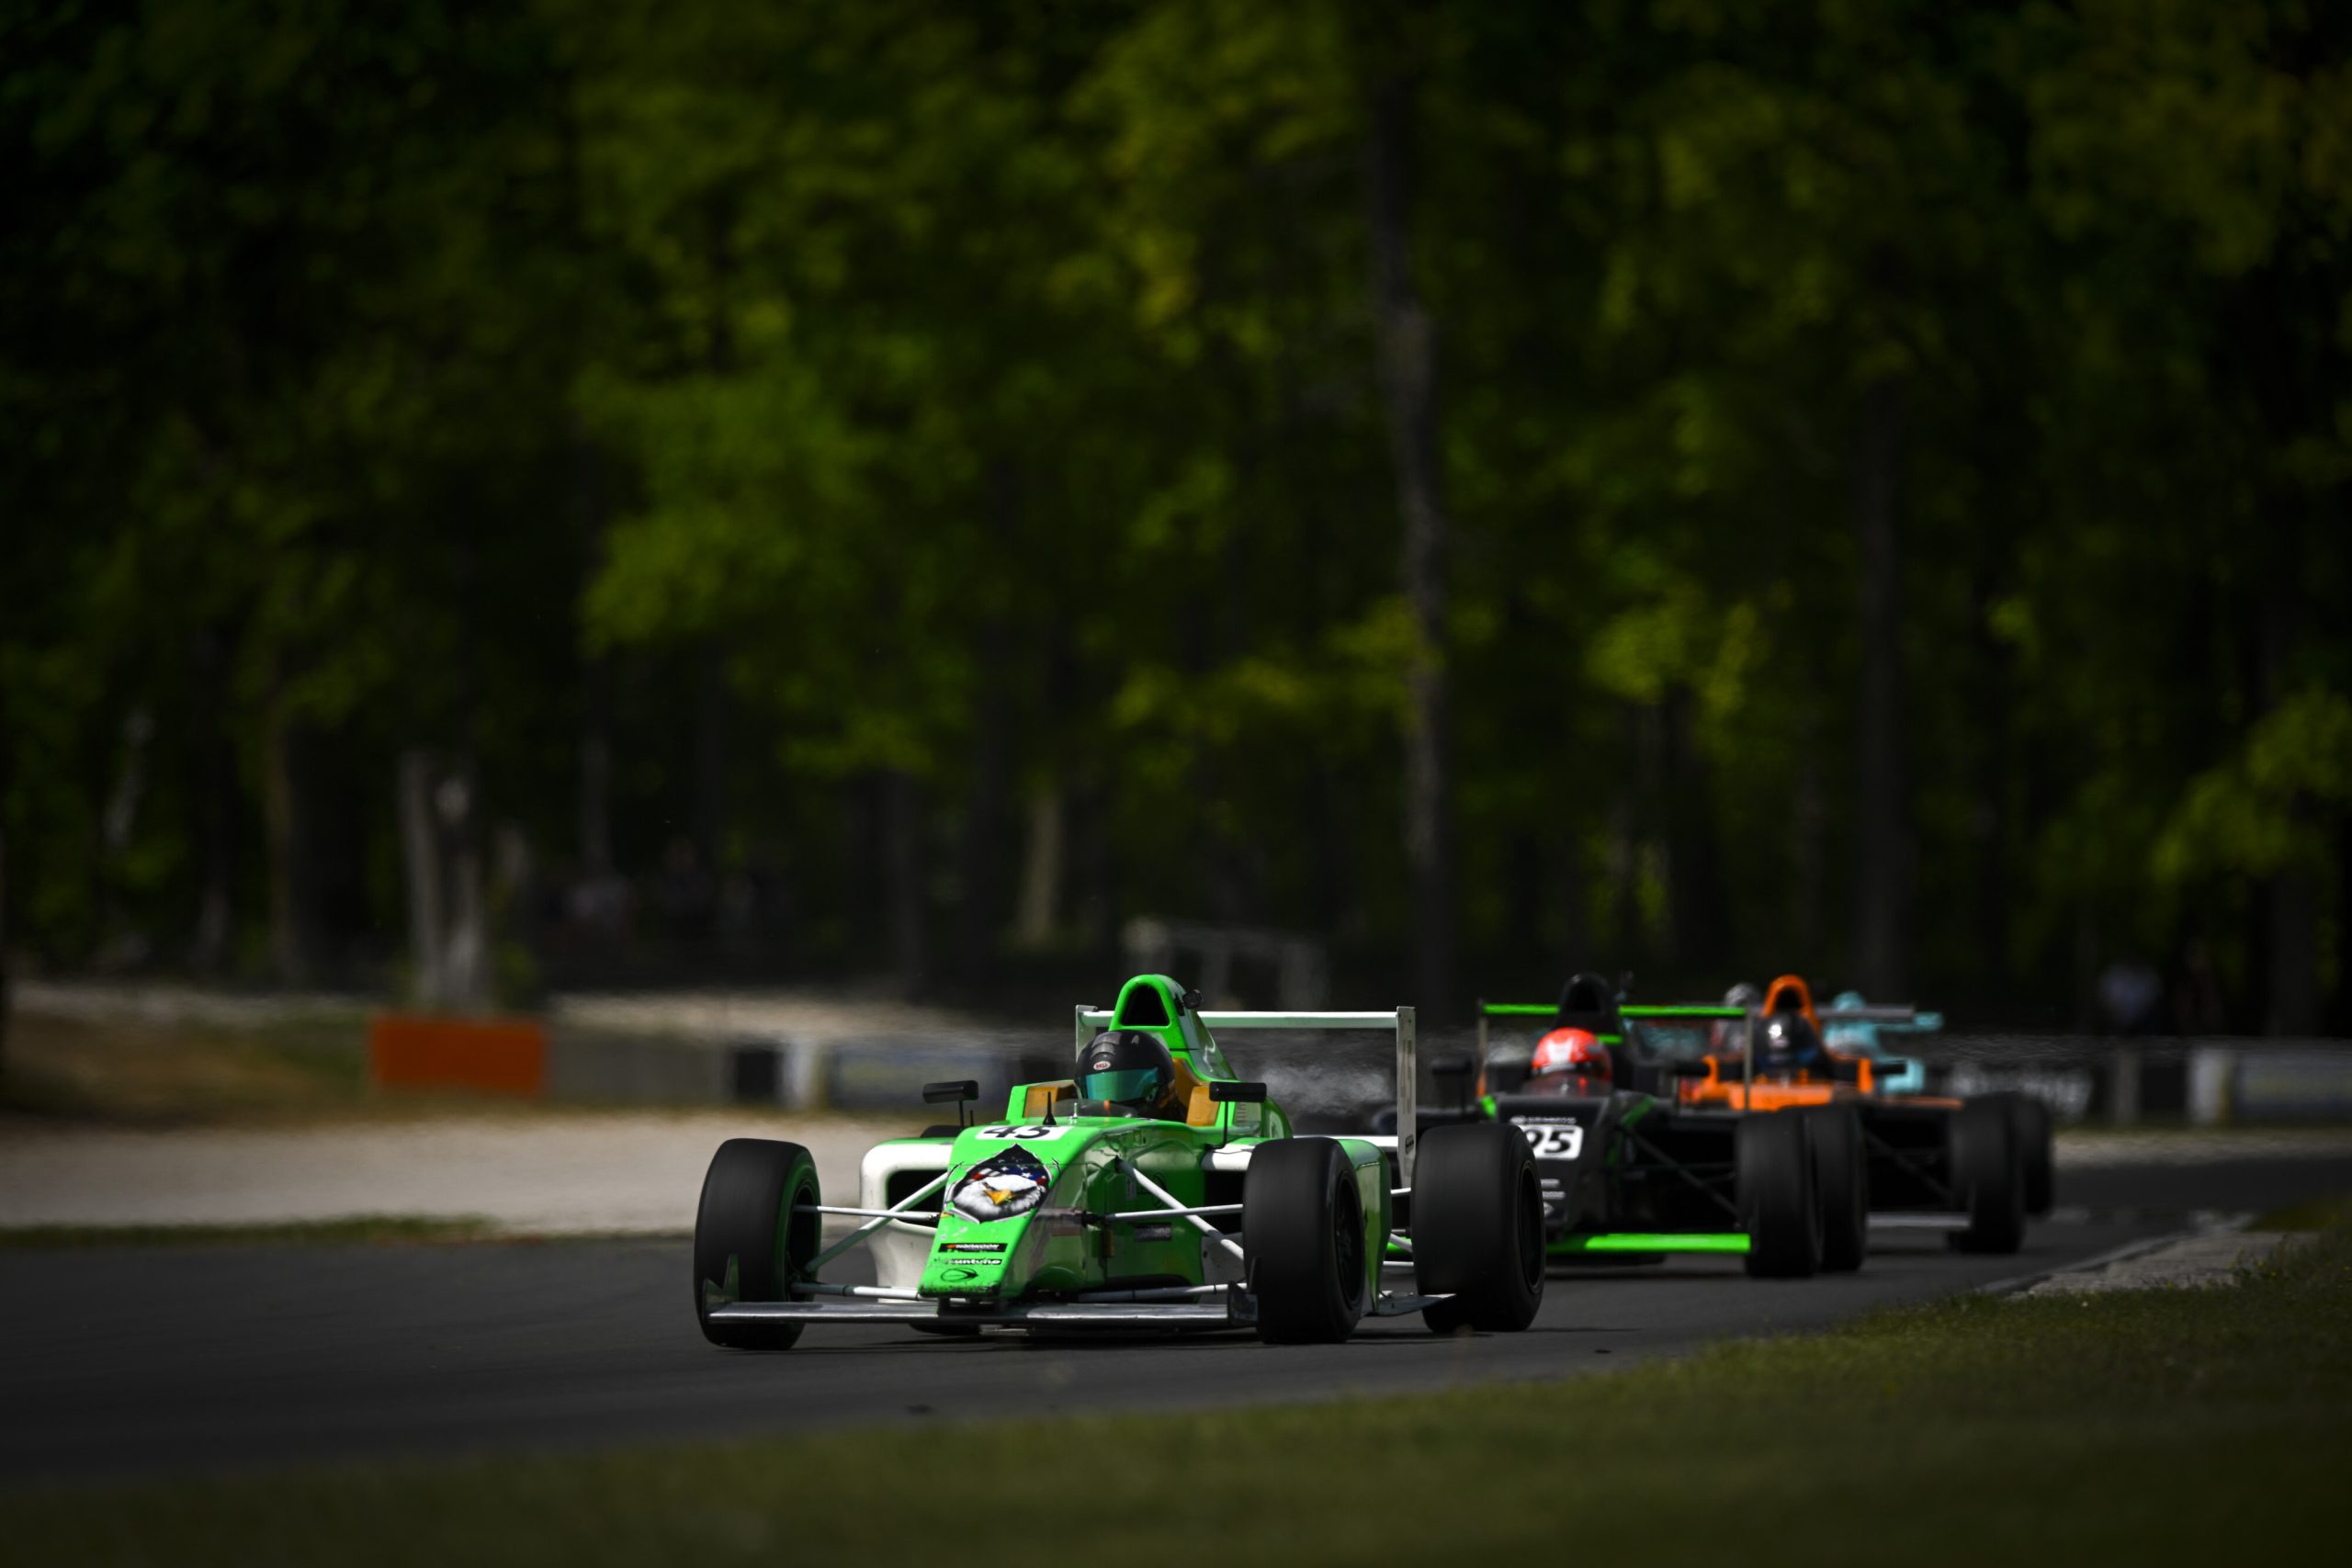 Bacon Zelenka Caps Off Weekend with Another Win at Road America